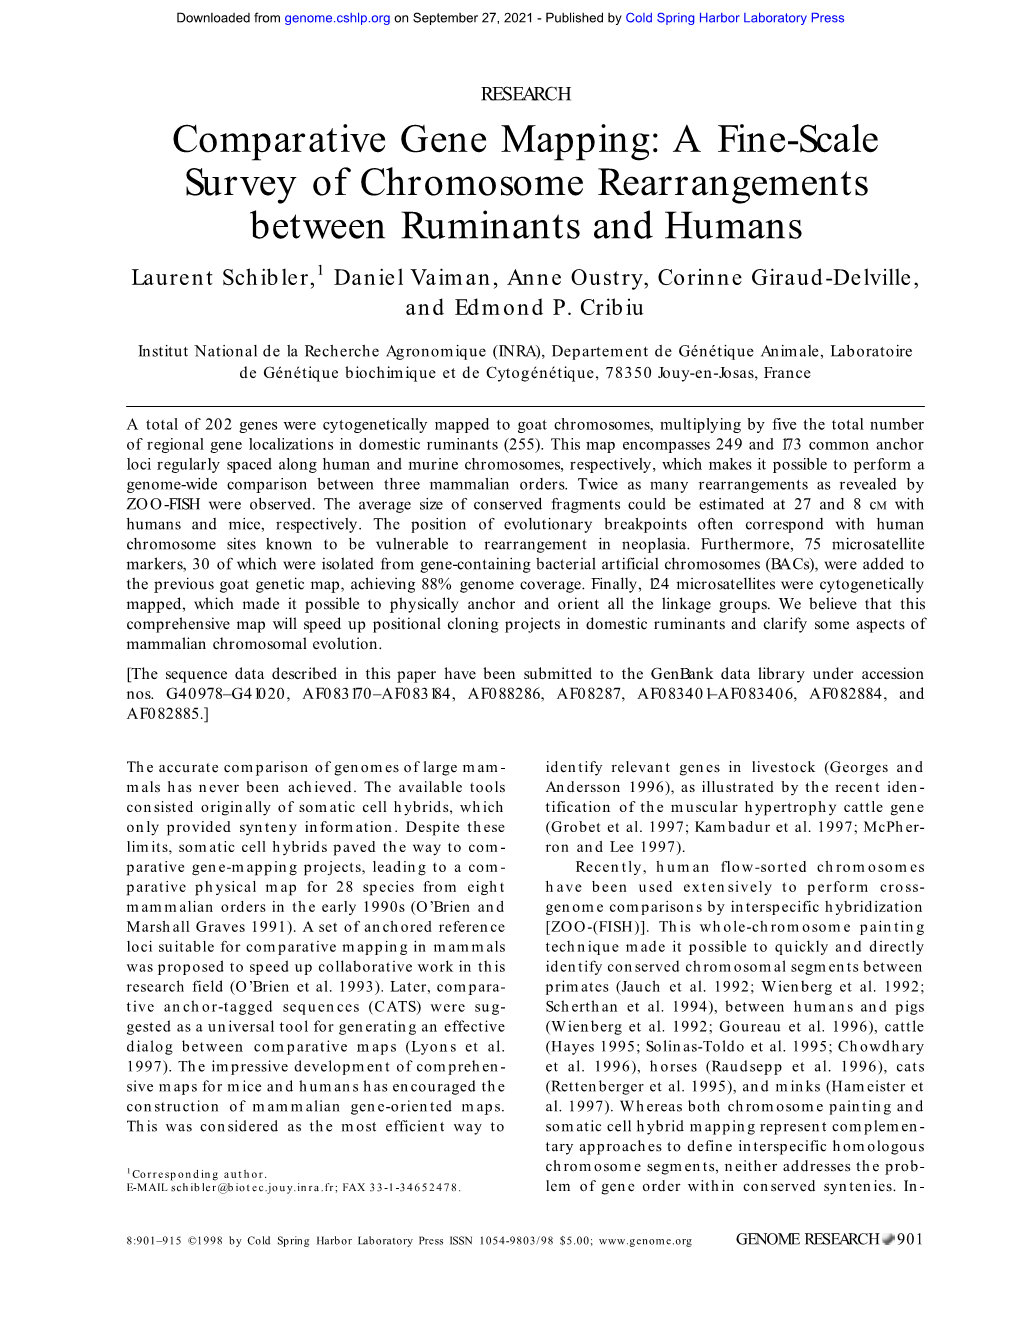 Comparative Gene Mapping: a Fine-Scale Survey of Chromosome